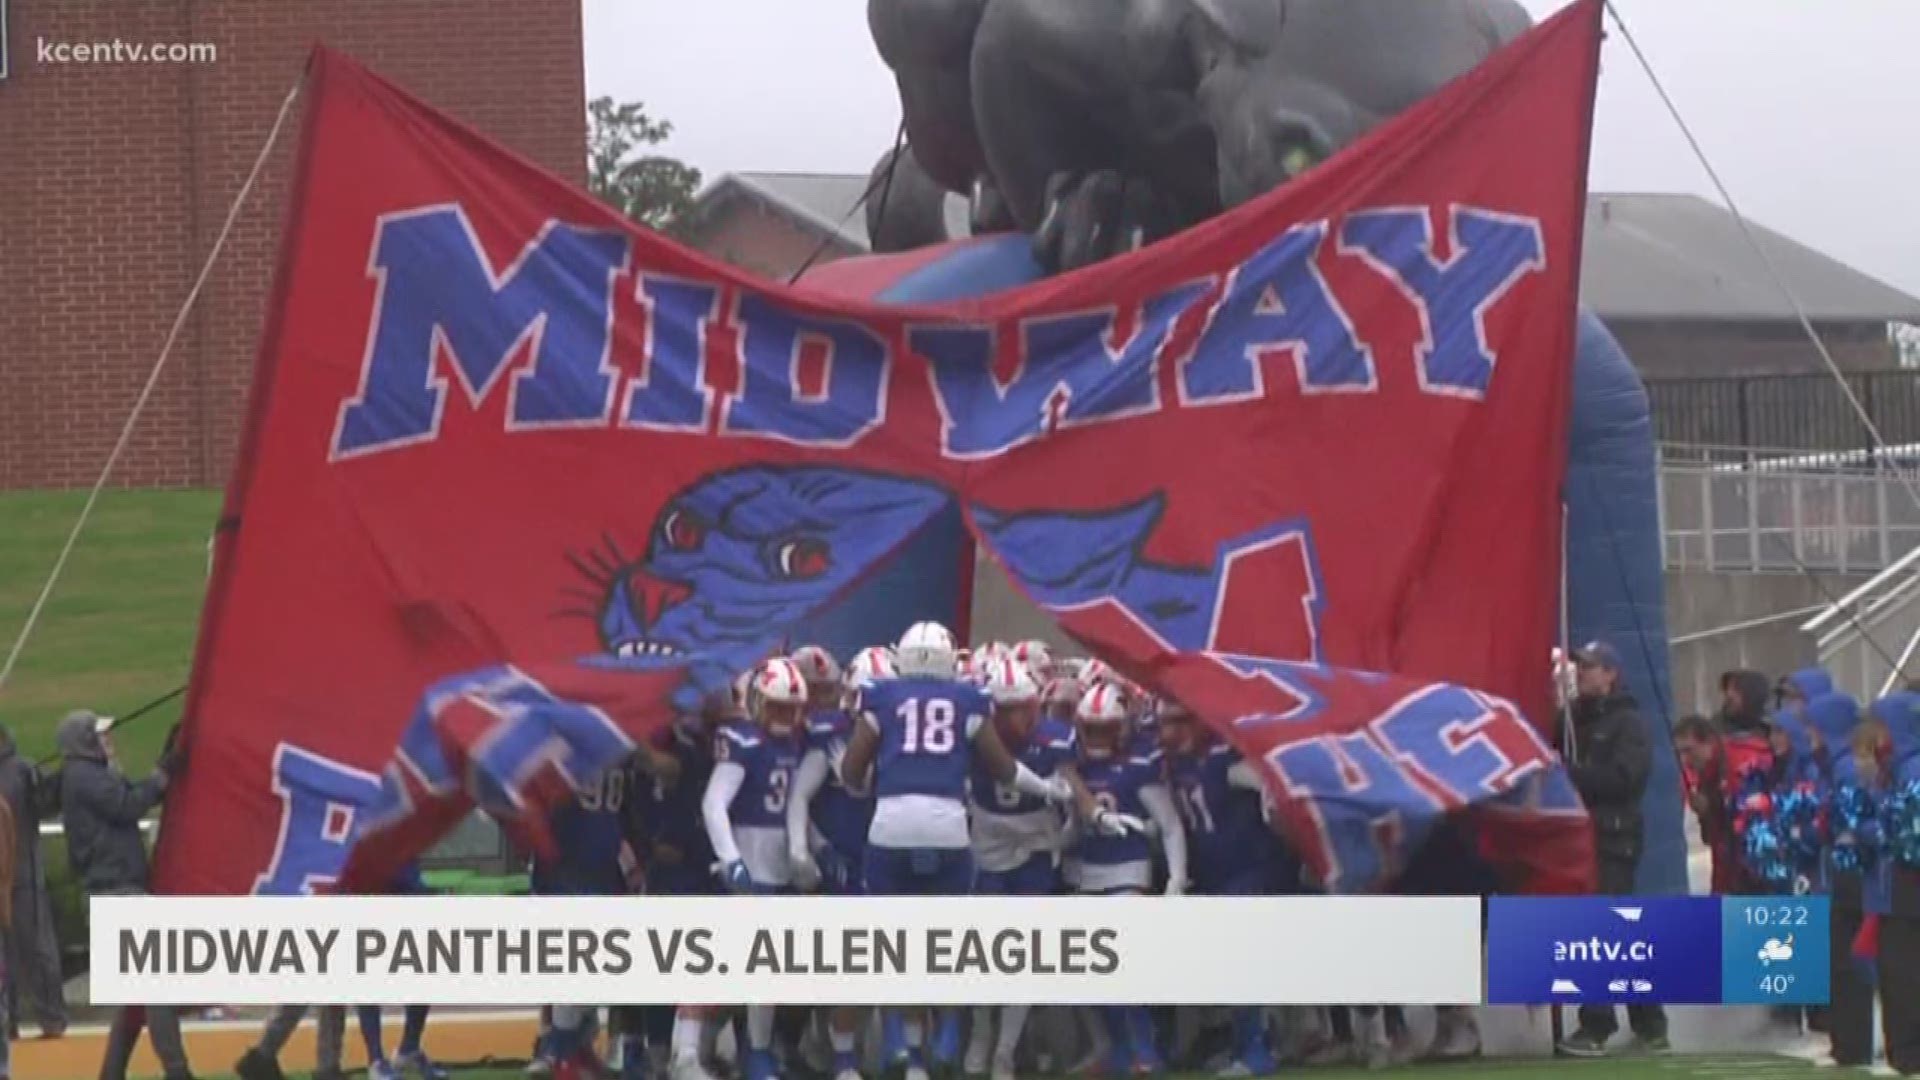 Midwayfell 51-7 to Allen in the quarterfinal round. The Panthers finished 11-2.